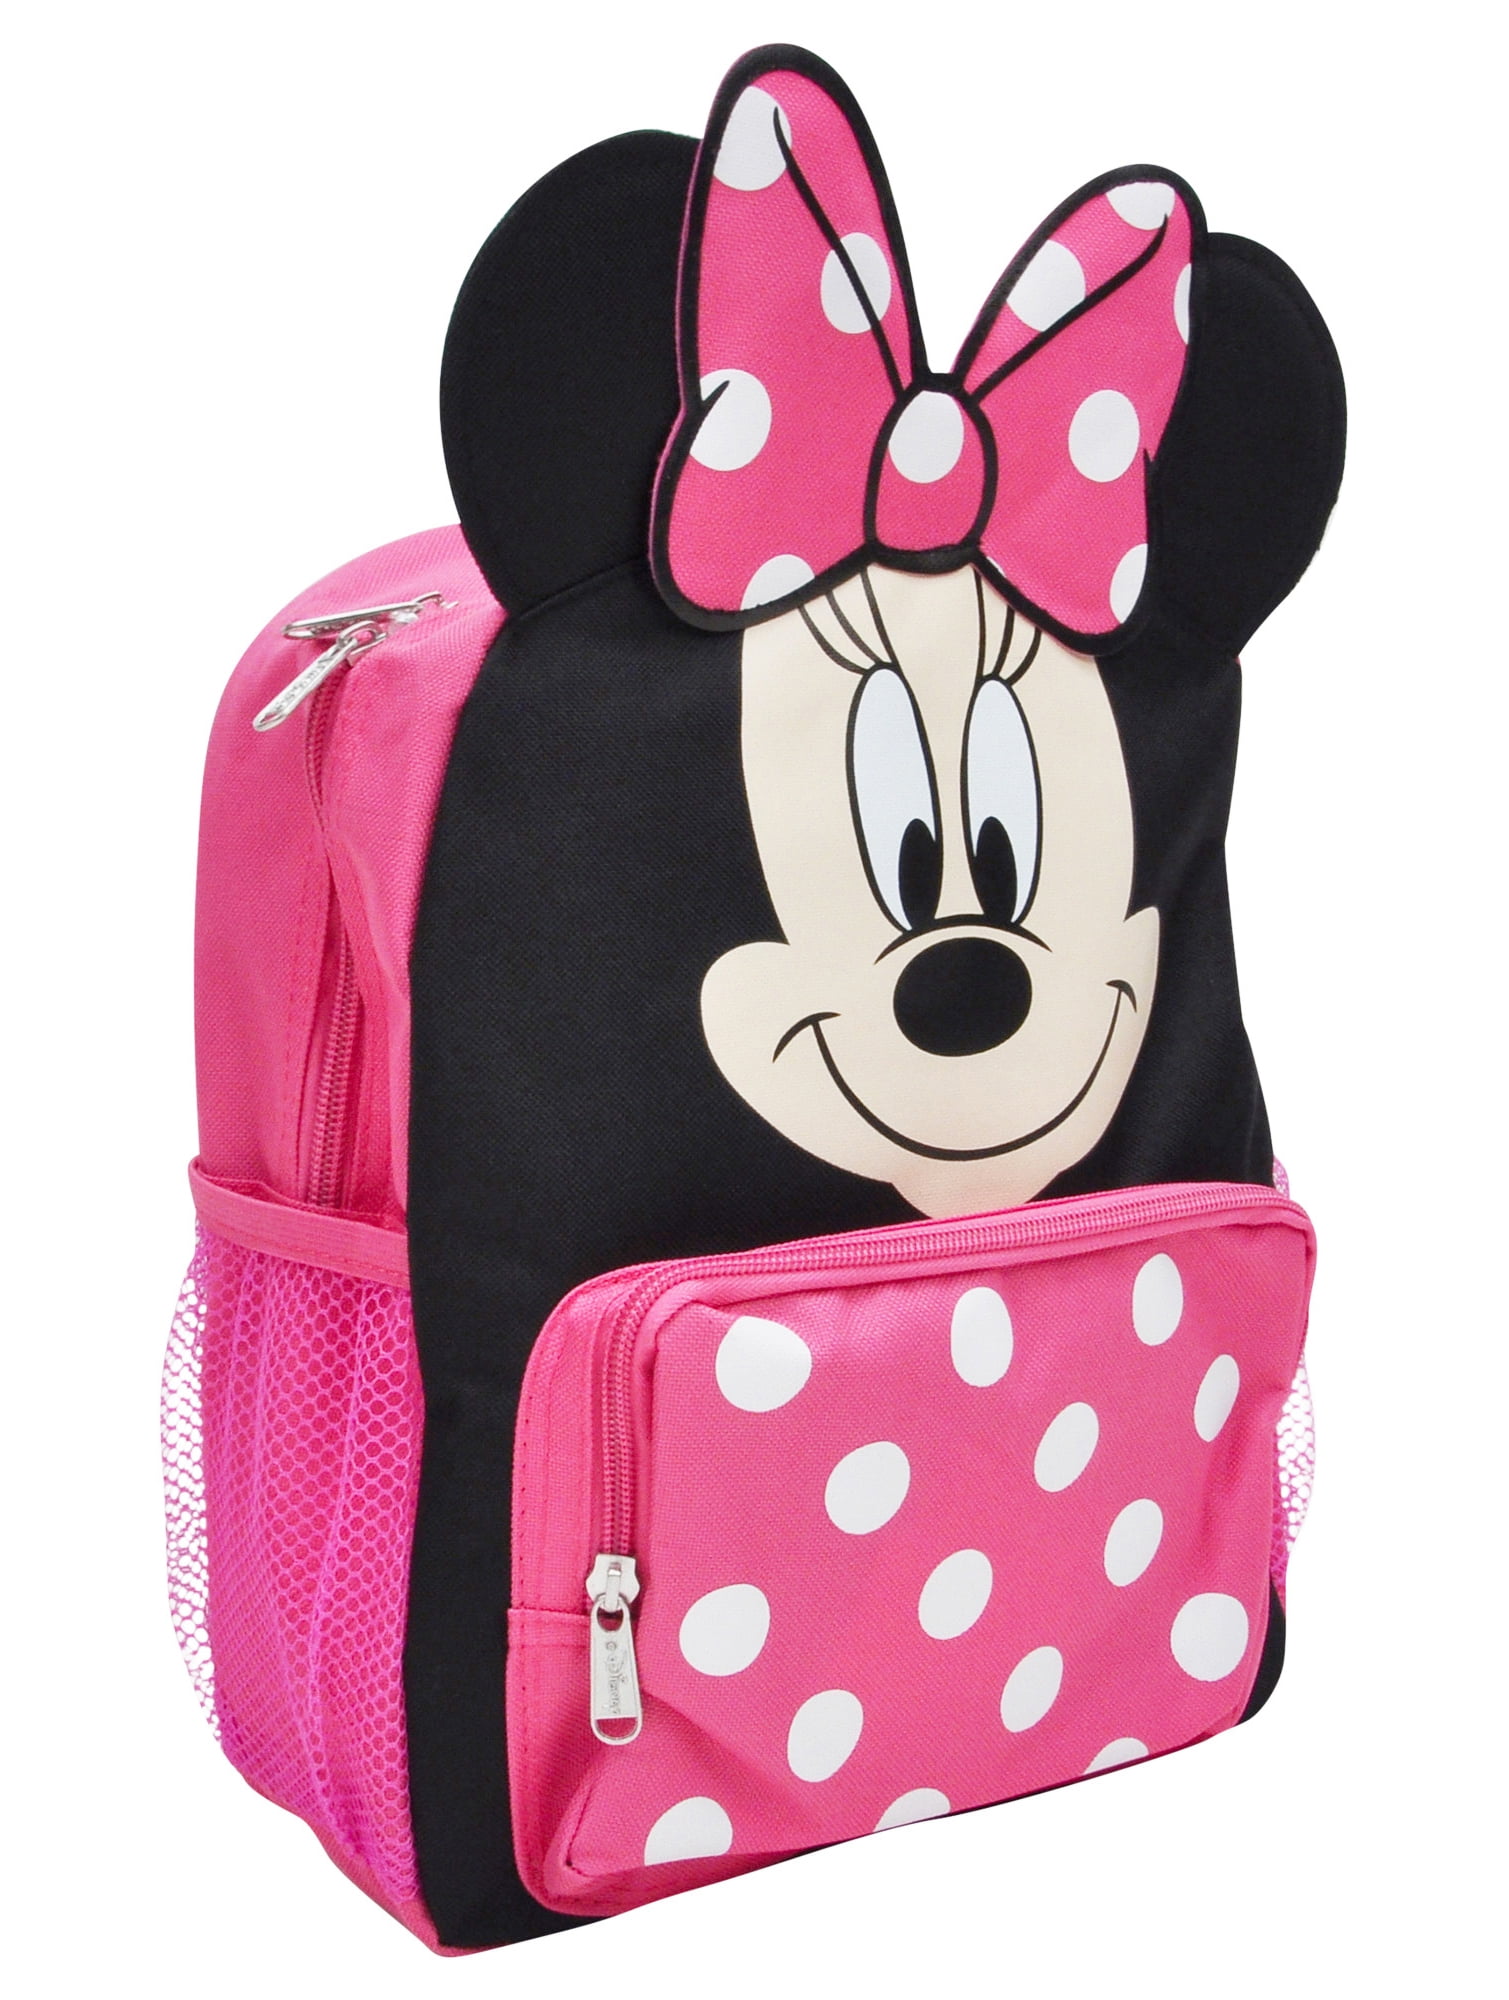 New Disney Minnie Mouse Sofia the First 3D Backpack Pink School Holiday Bag 